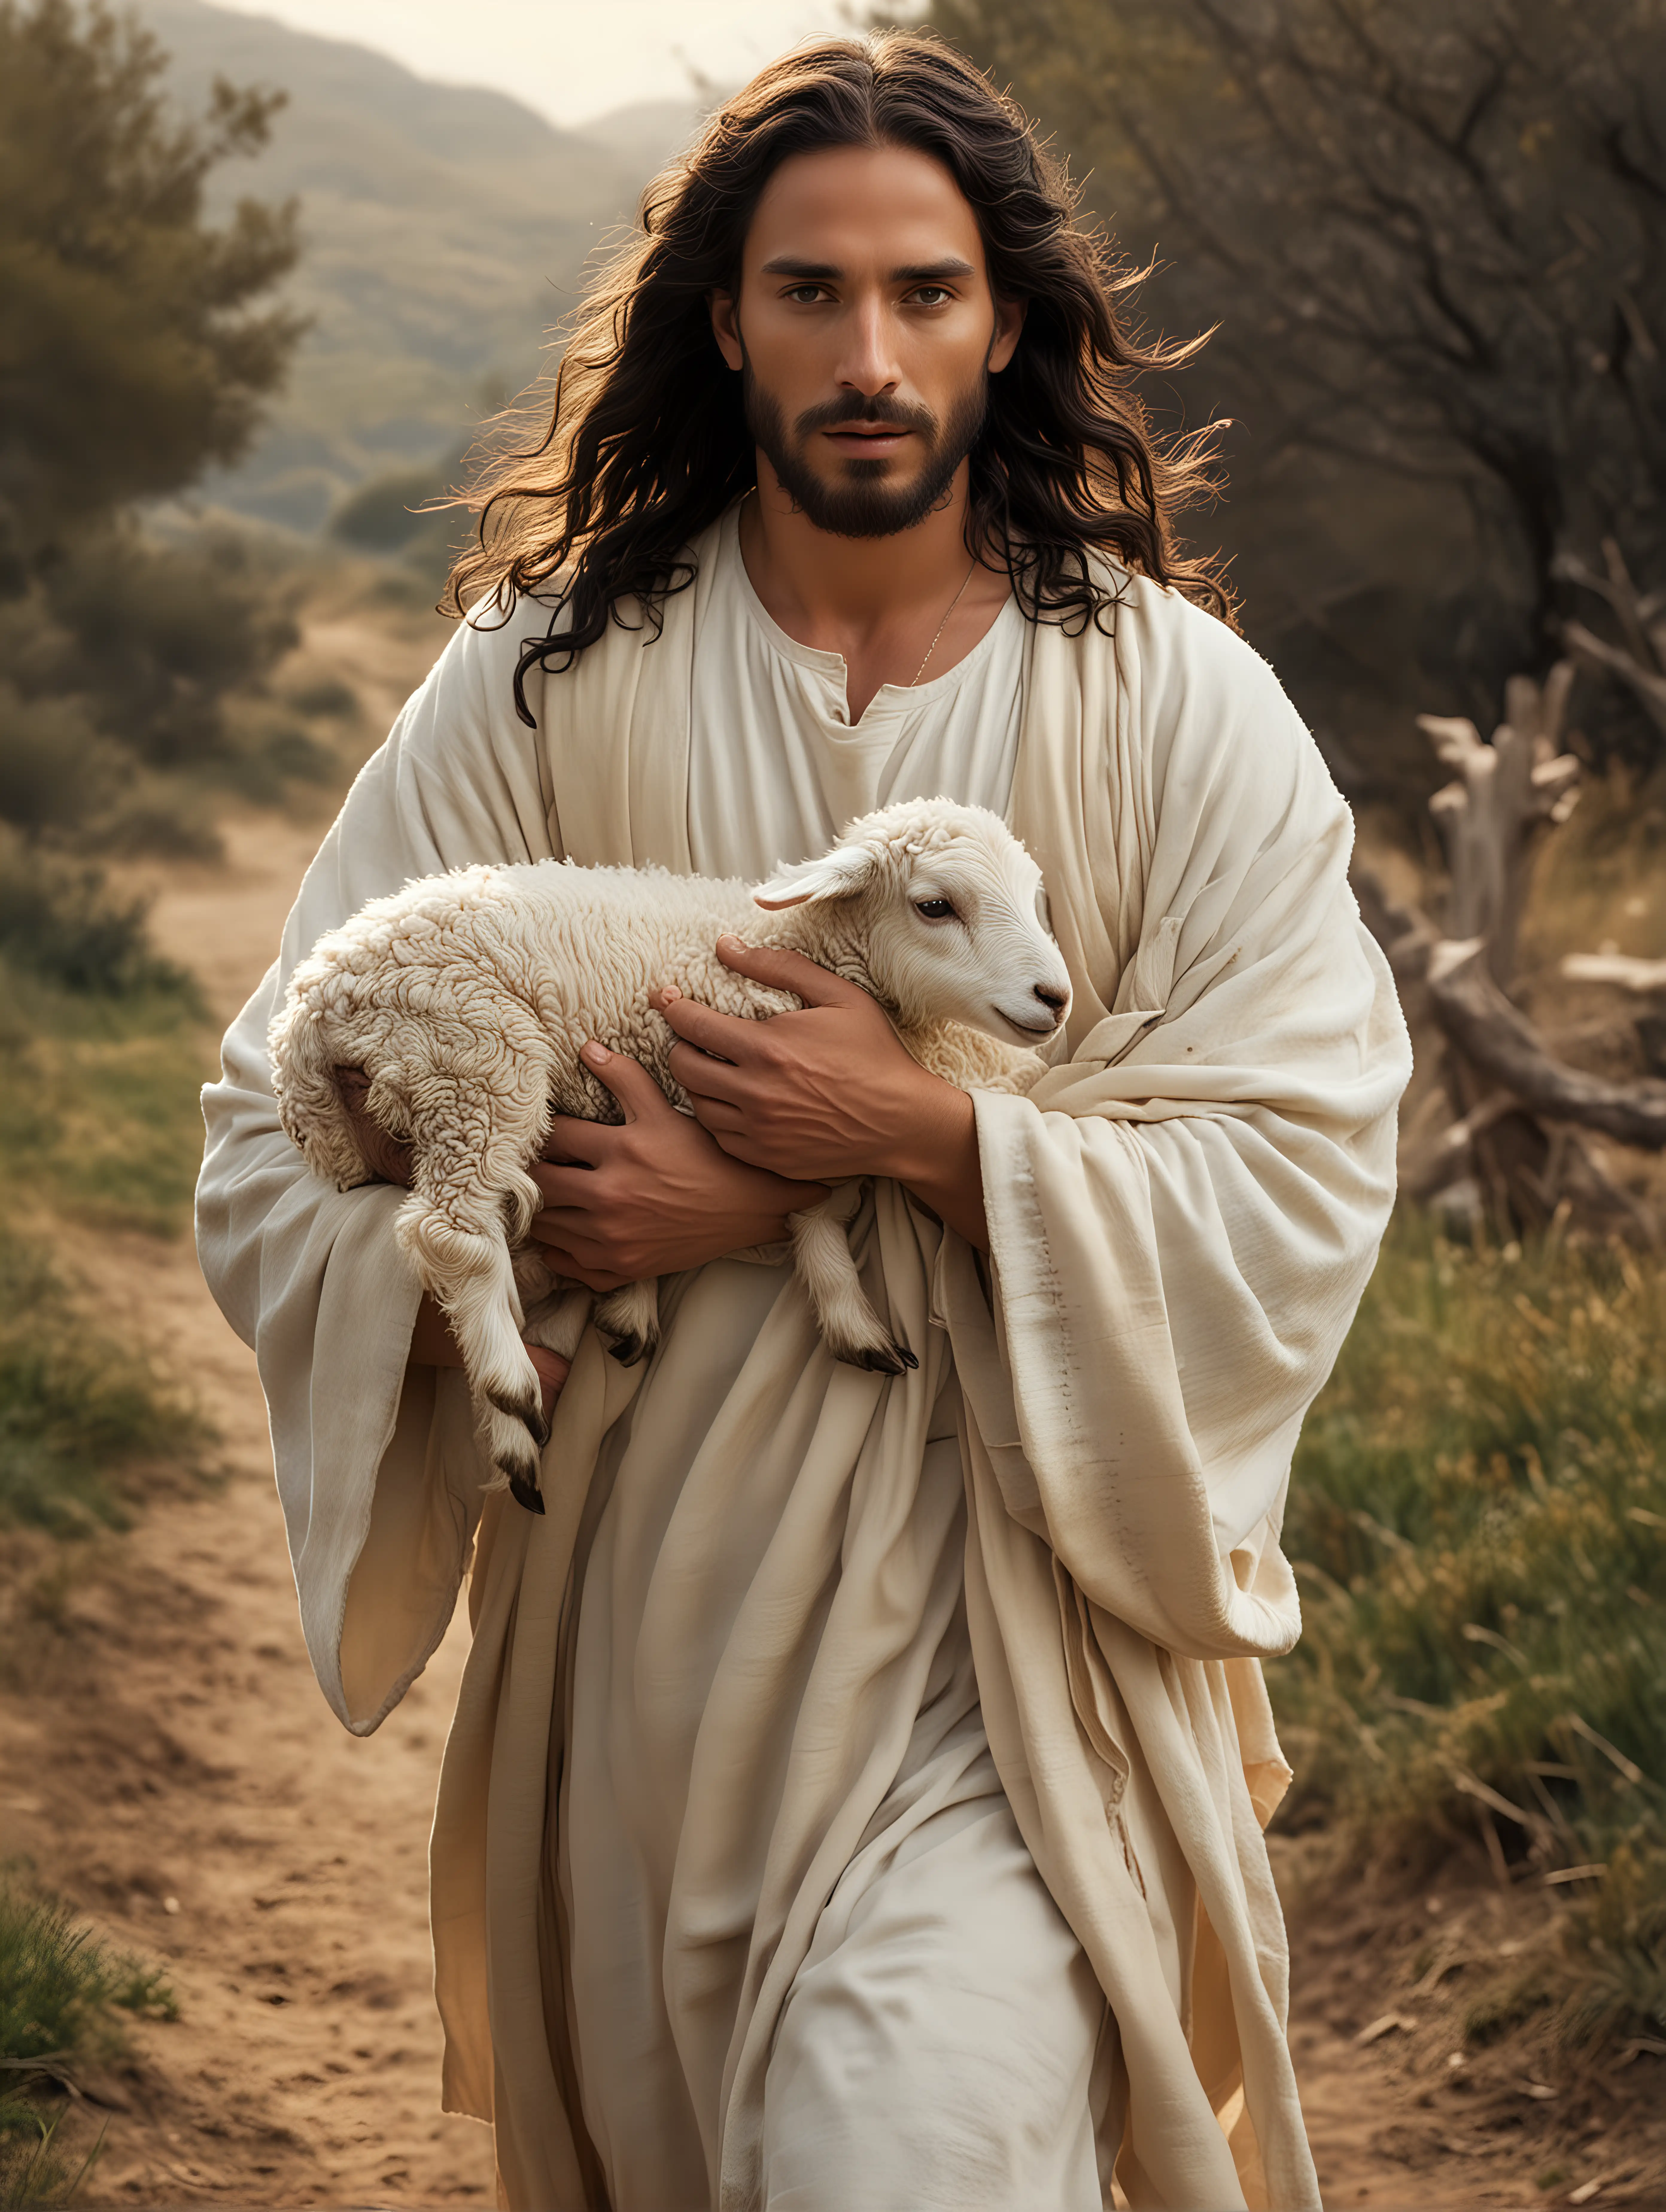 JESUS WITH LONG, DARK WAVY HAIR, CARRYING A LAMB IN HIS ARM